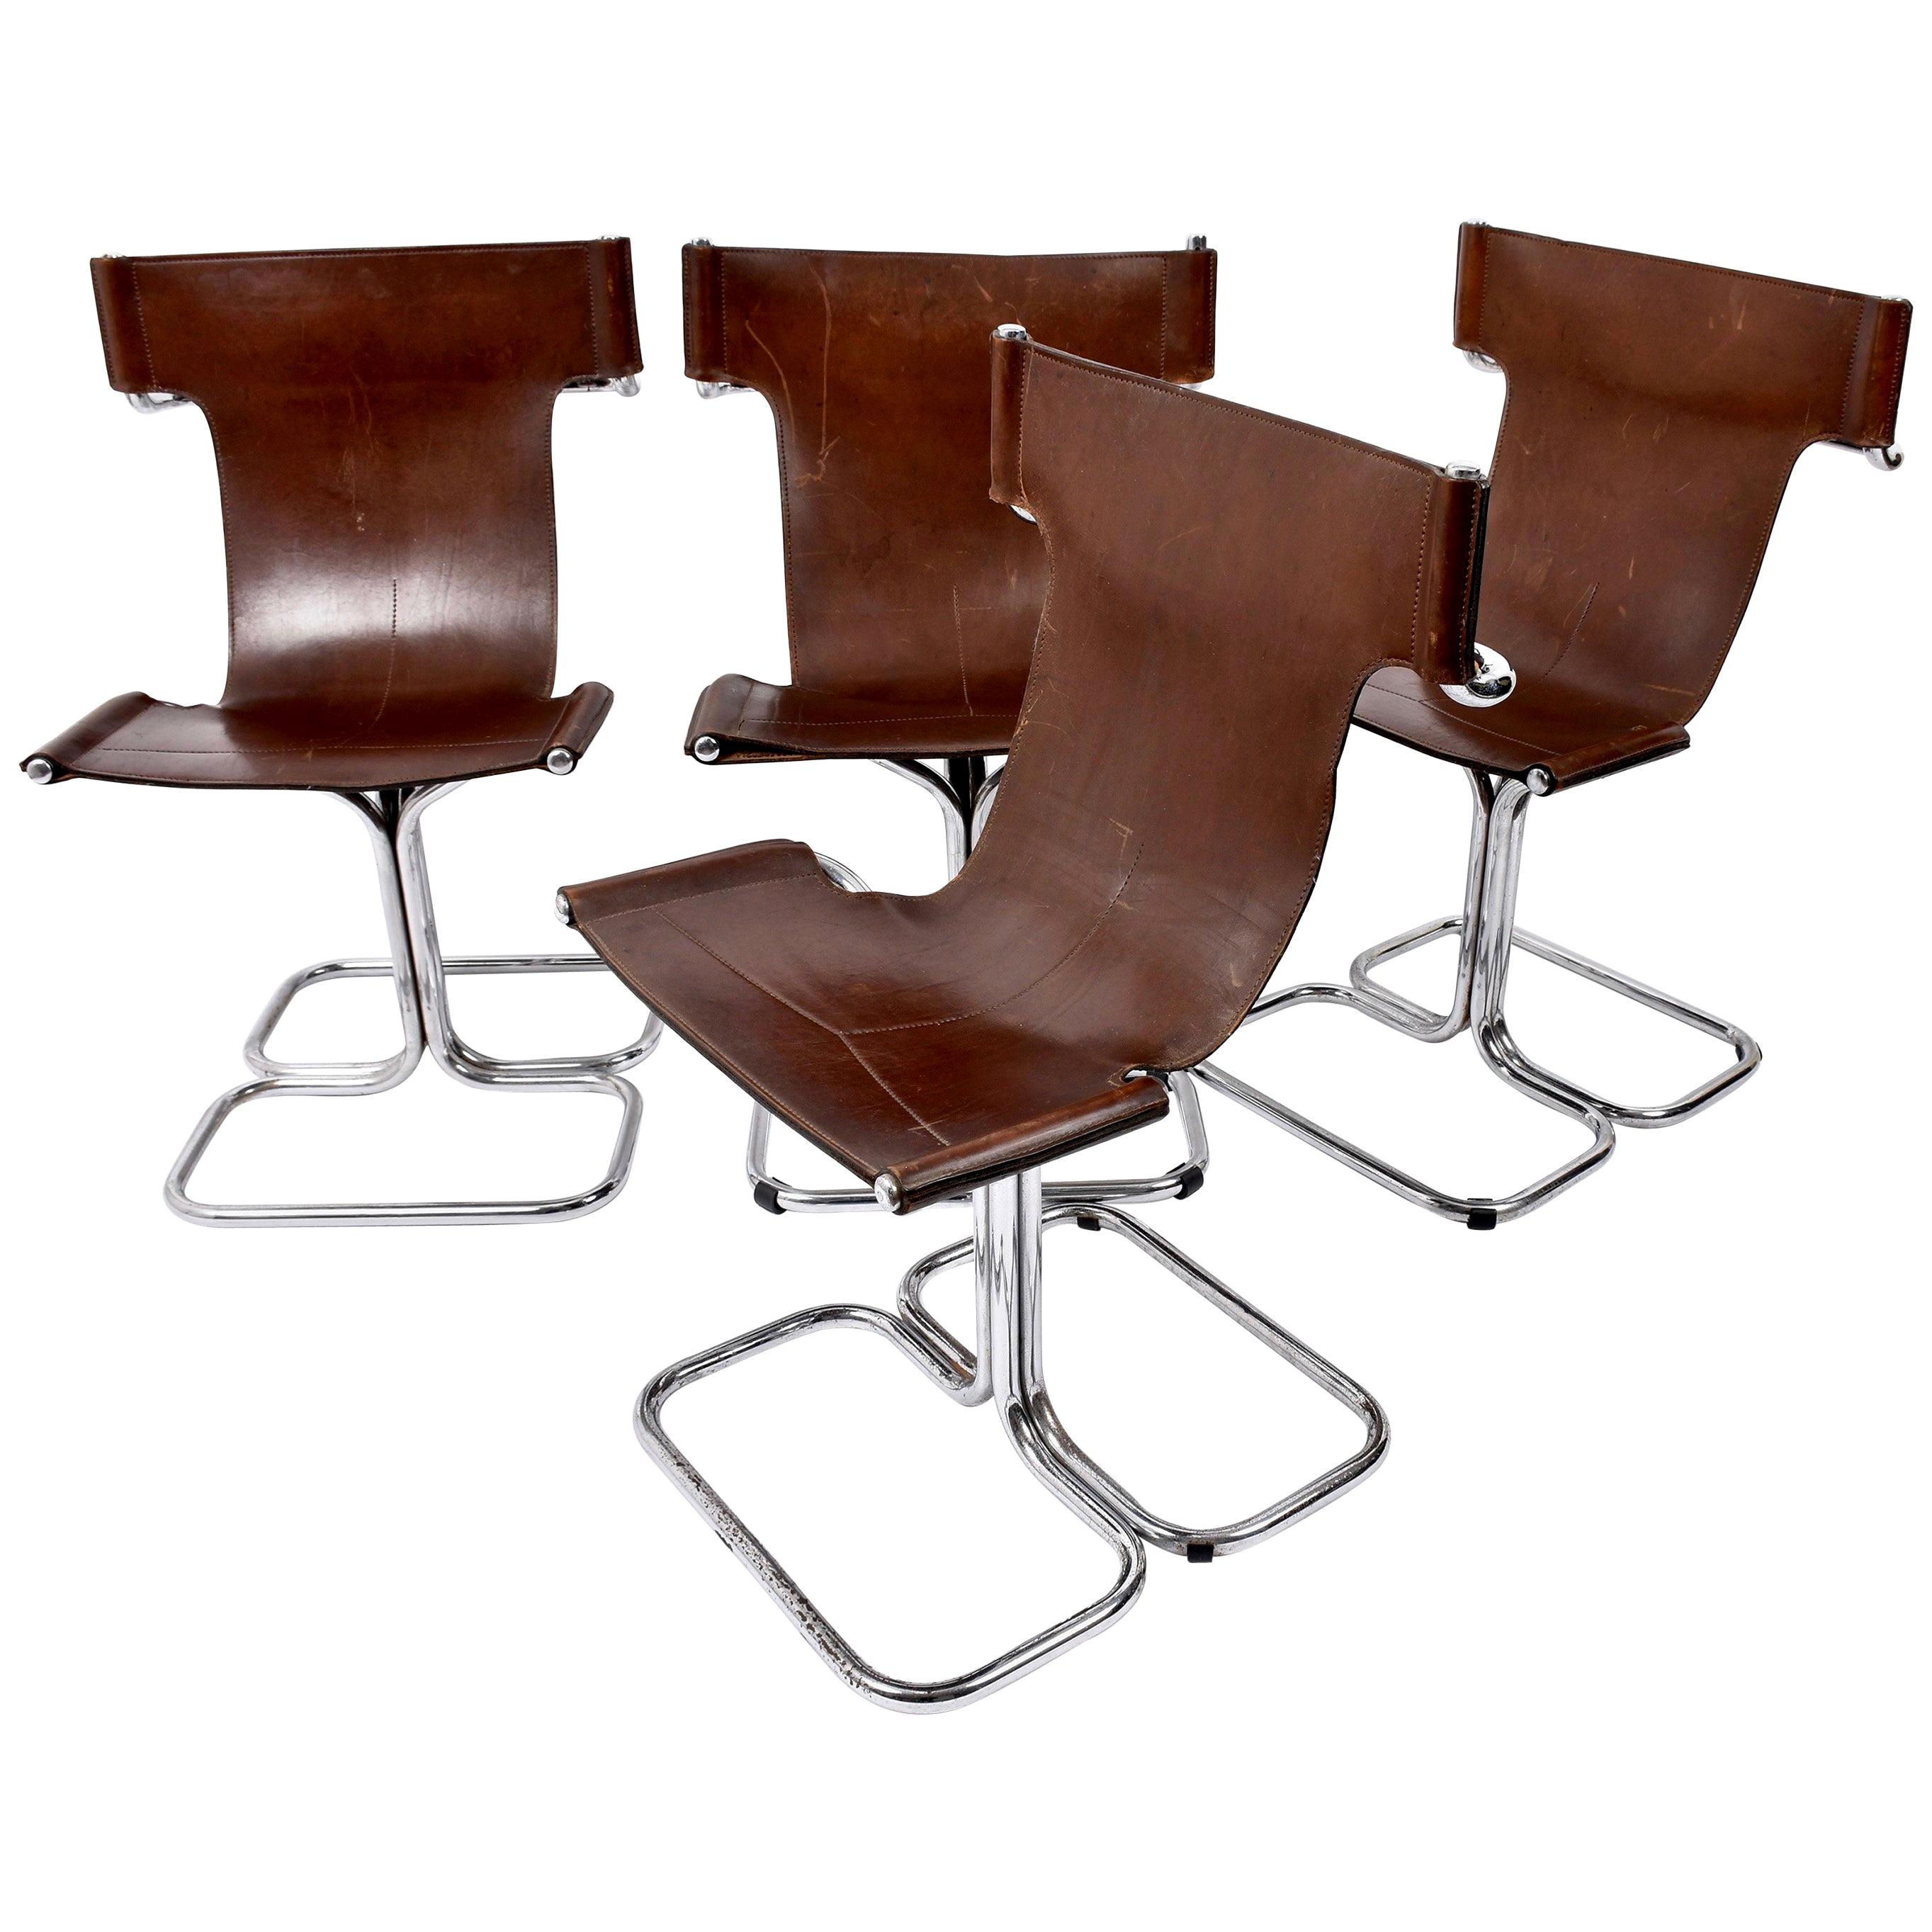 Faleschini Midcentury Chrome and Brown Leather Italian Chairs, 1970s